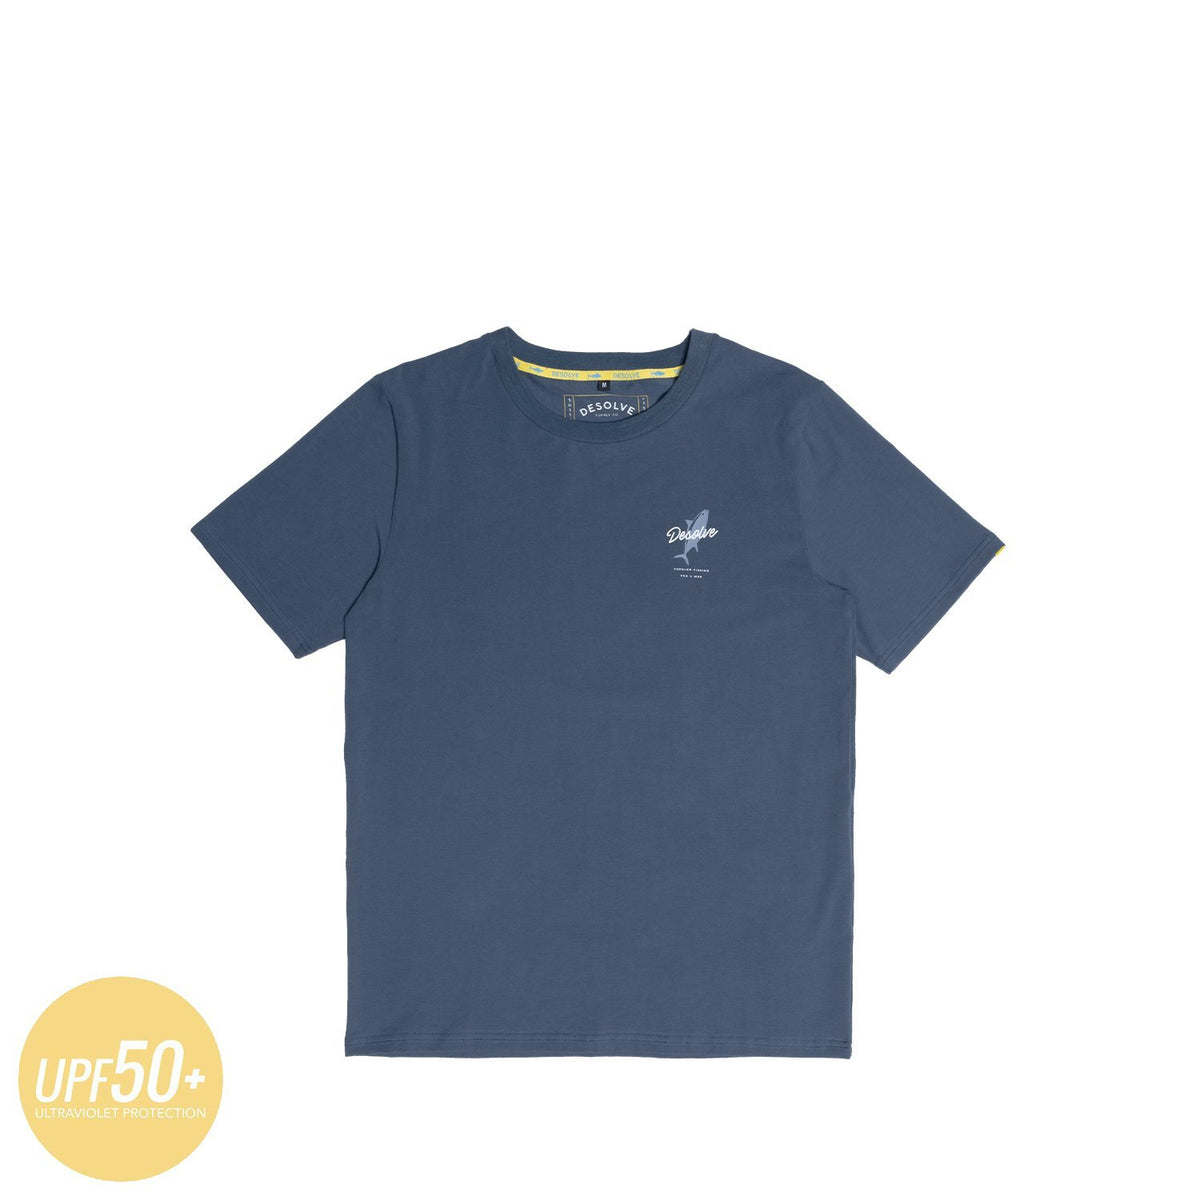 Desolve Supply Co, Forever Fishing LS Tee, UPF 50+, Standard Fit Fishing  T-shirt, Mens - Desolve Supply Co.